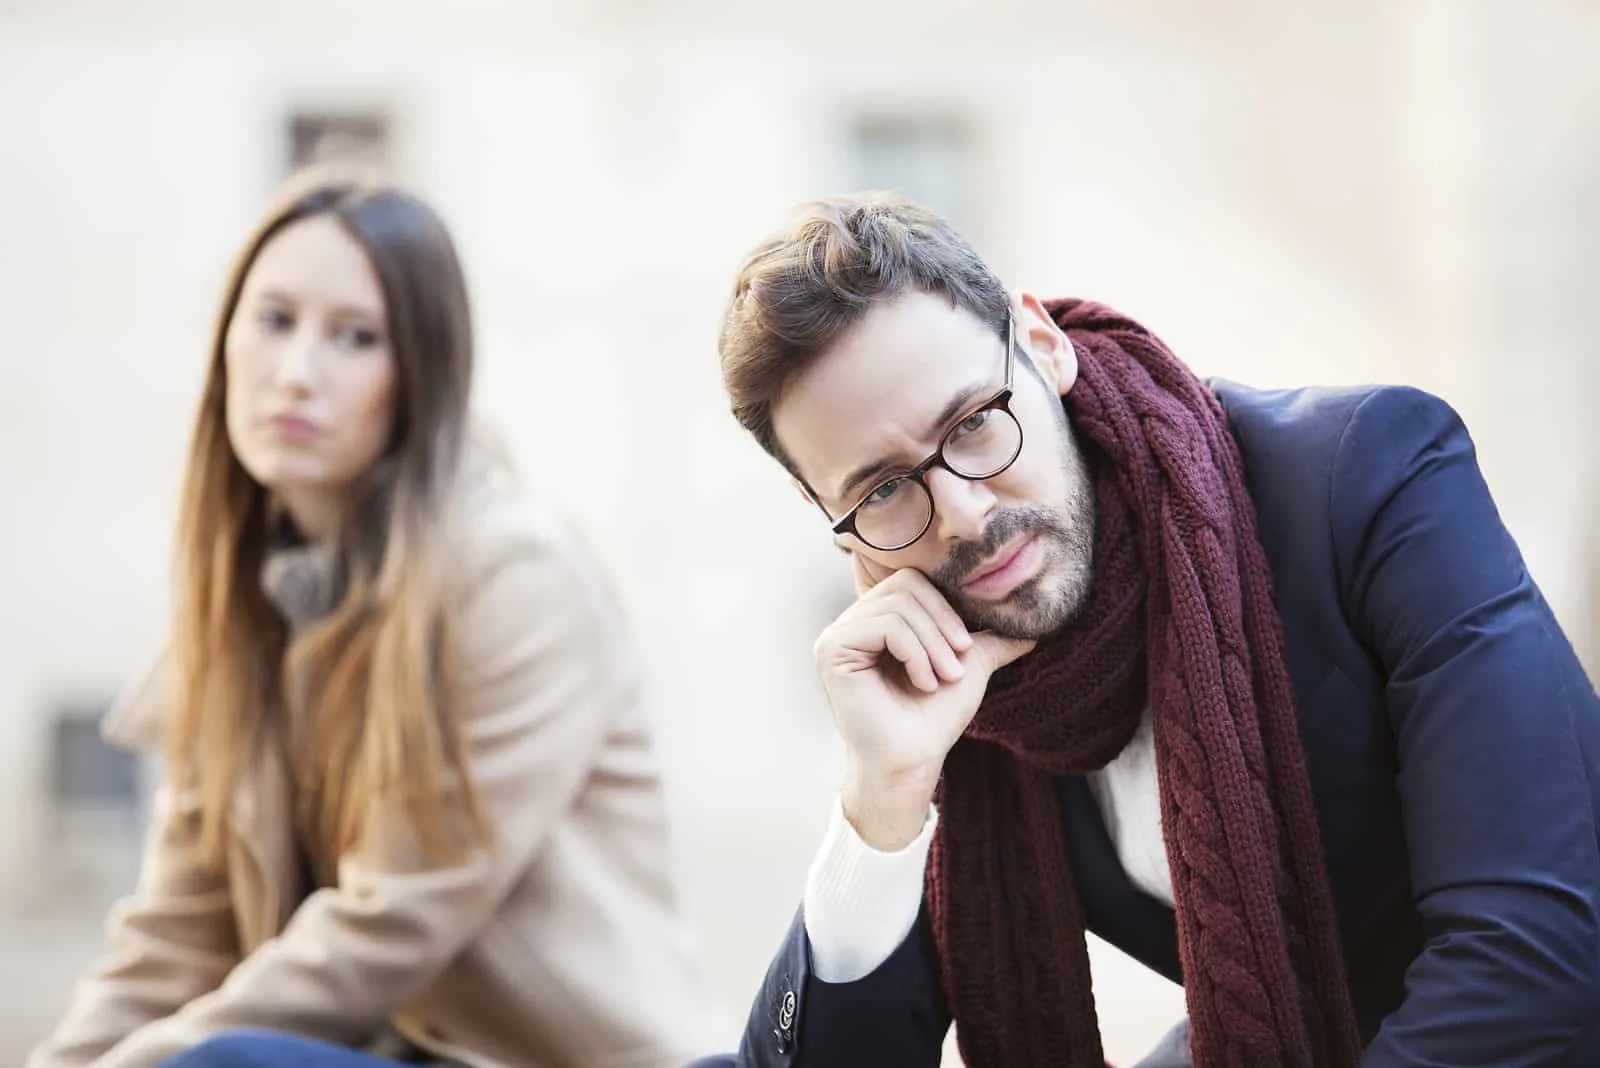 pensive man with eyeglasses sitting near woman outdoor